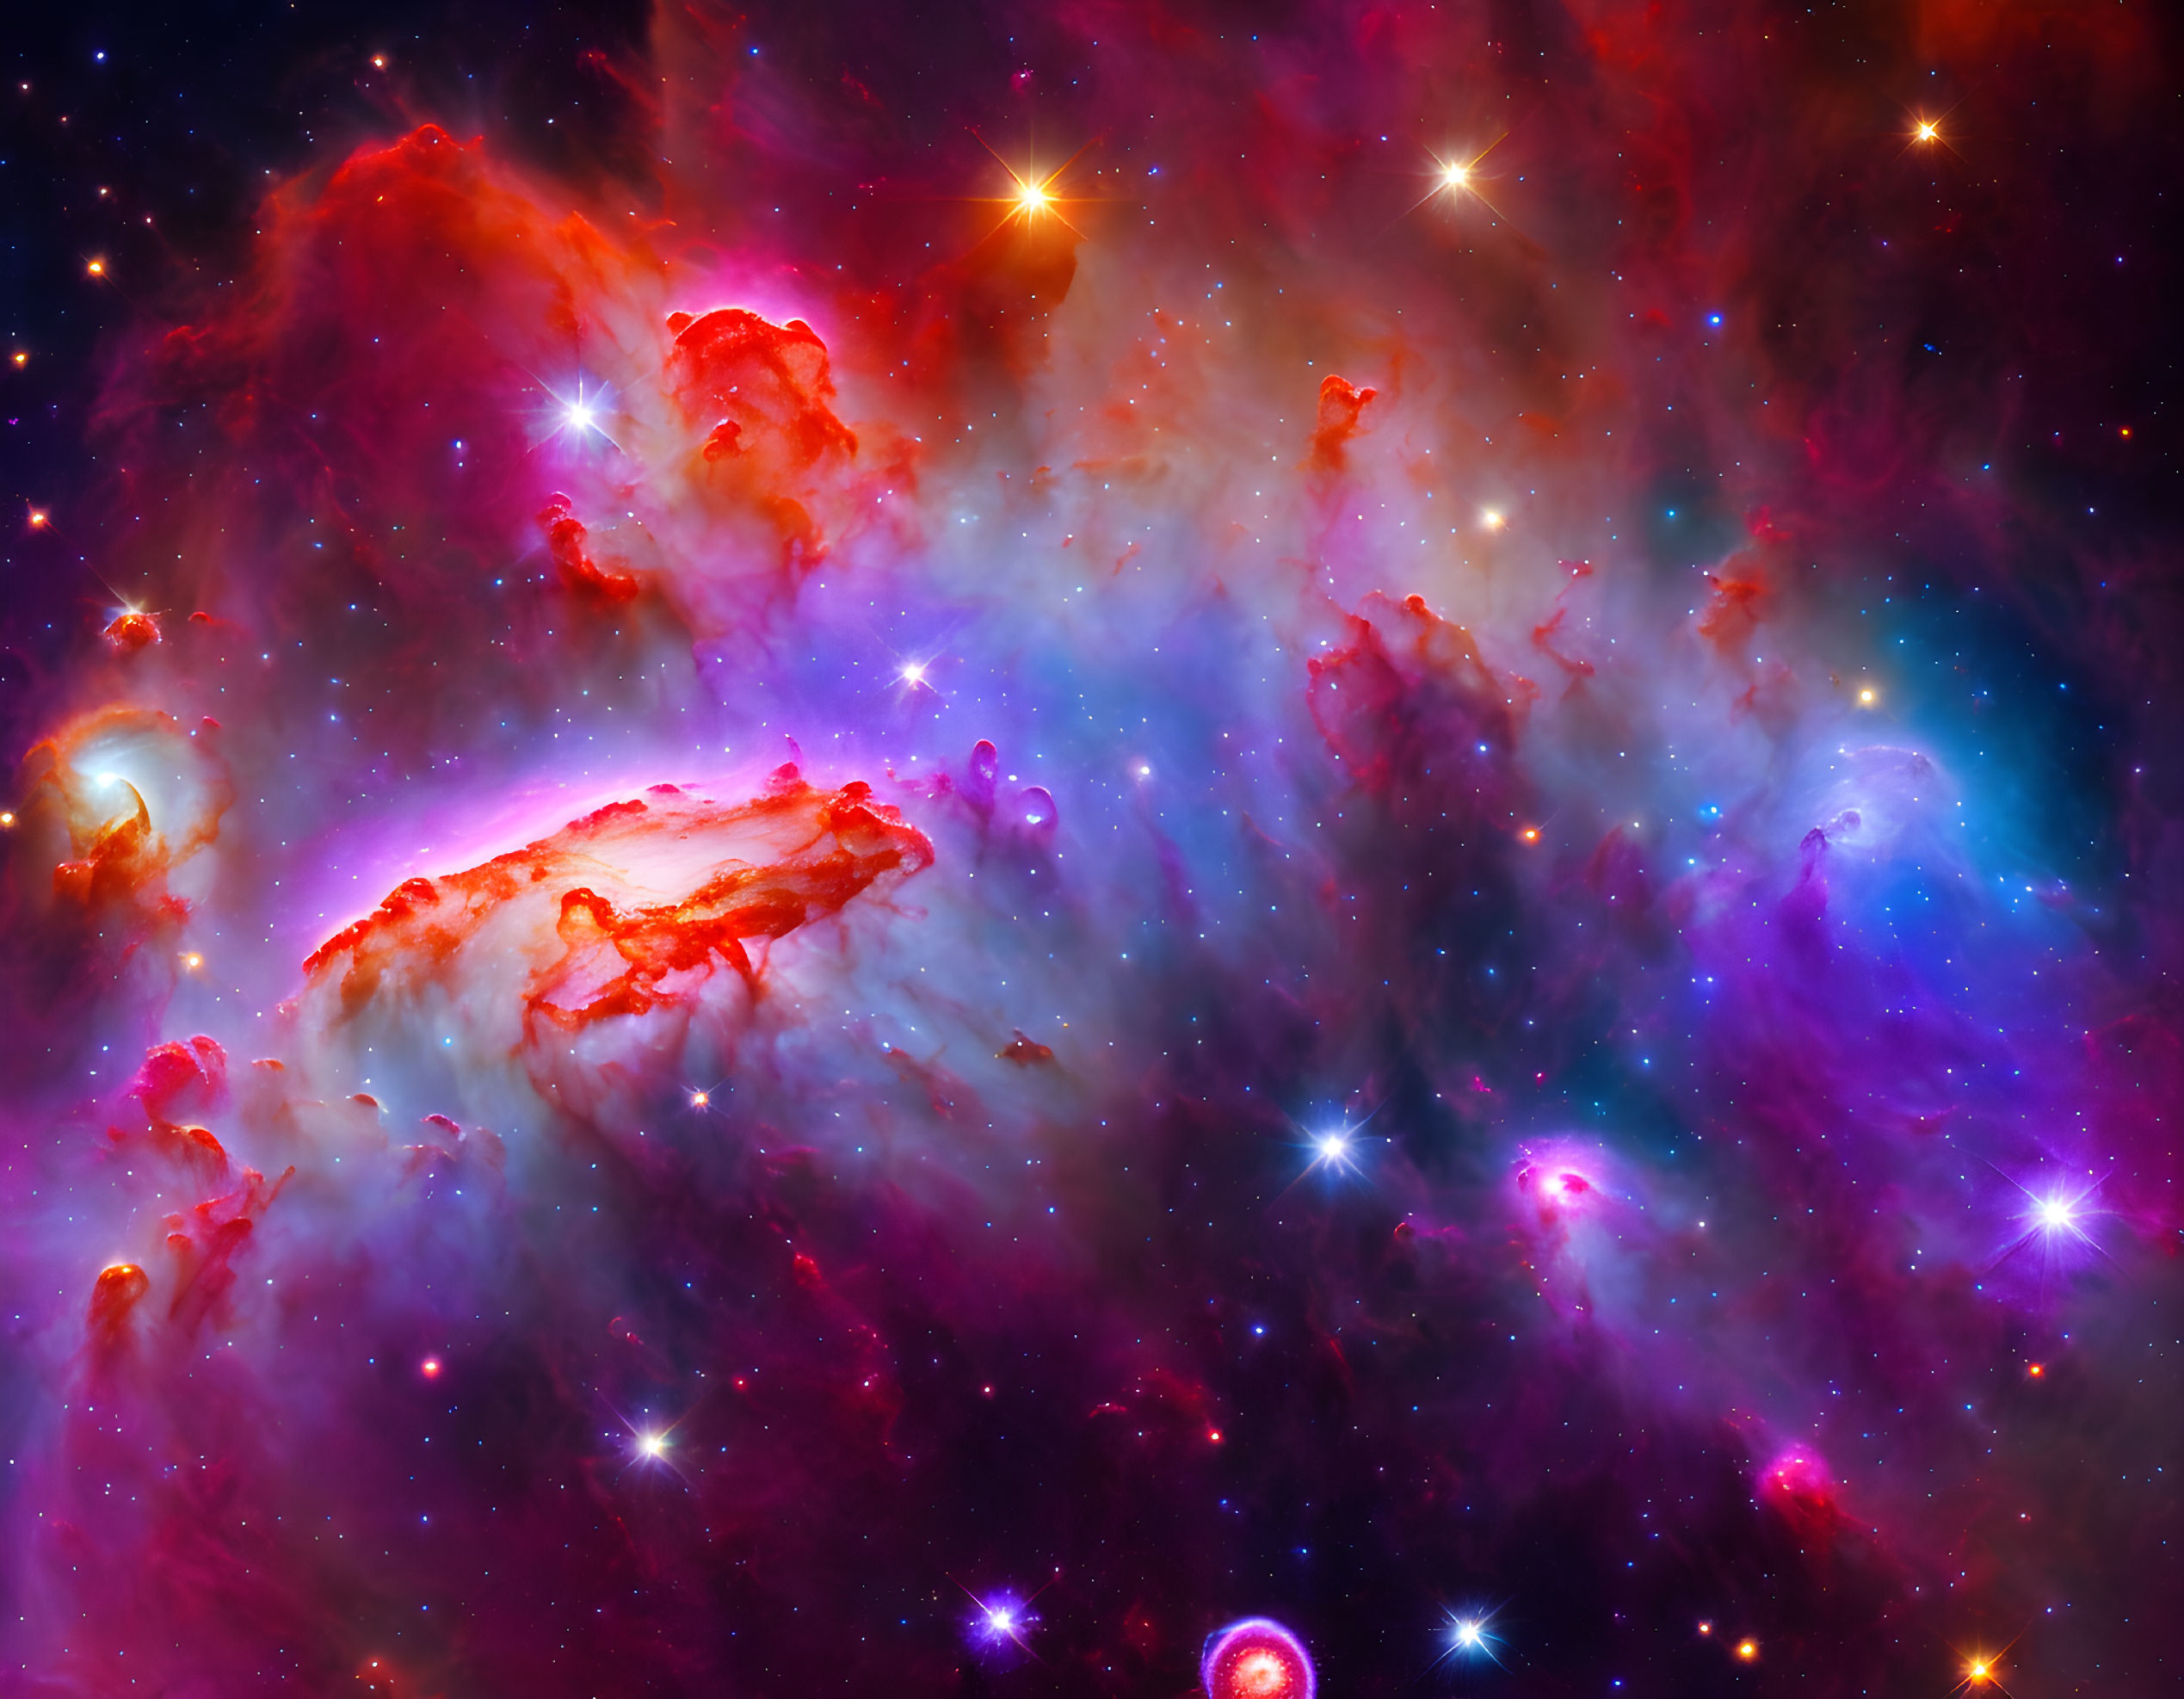 Colorful Space Nebula with Purple, Blue, and Red Hues